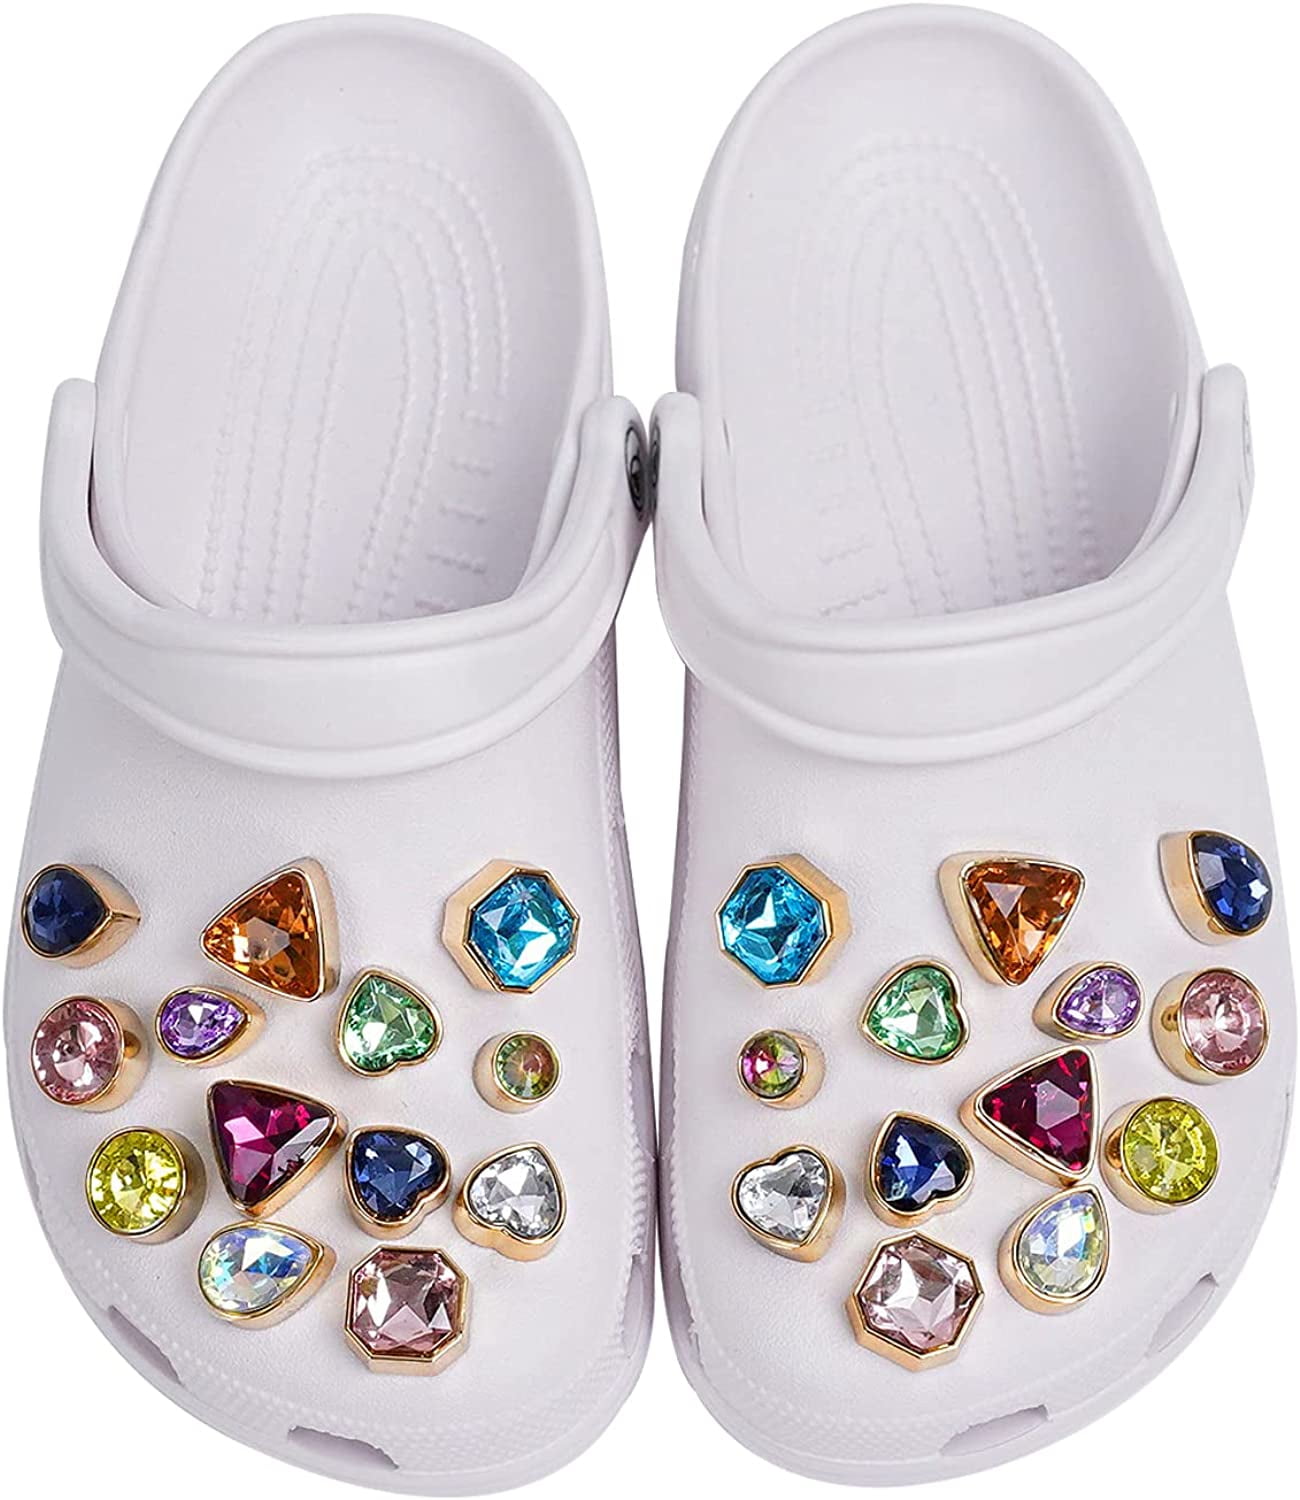  Bling Charms for Croc Girls and Women, Pink Shoe Charms for  Croc, Jewels Shoe Decoration Accessories,Fashion Crystal Rhinestone Shoe  Charms. : Ghhvkz: Clothing, Shoes & Jewelry